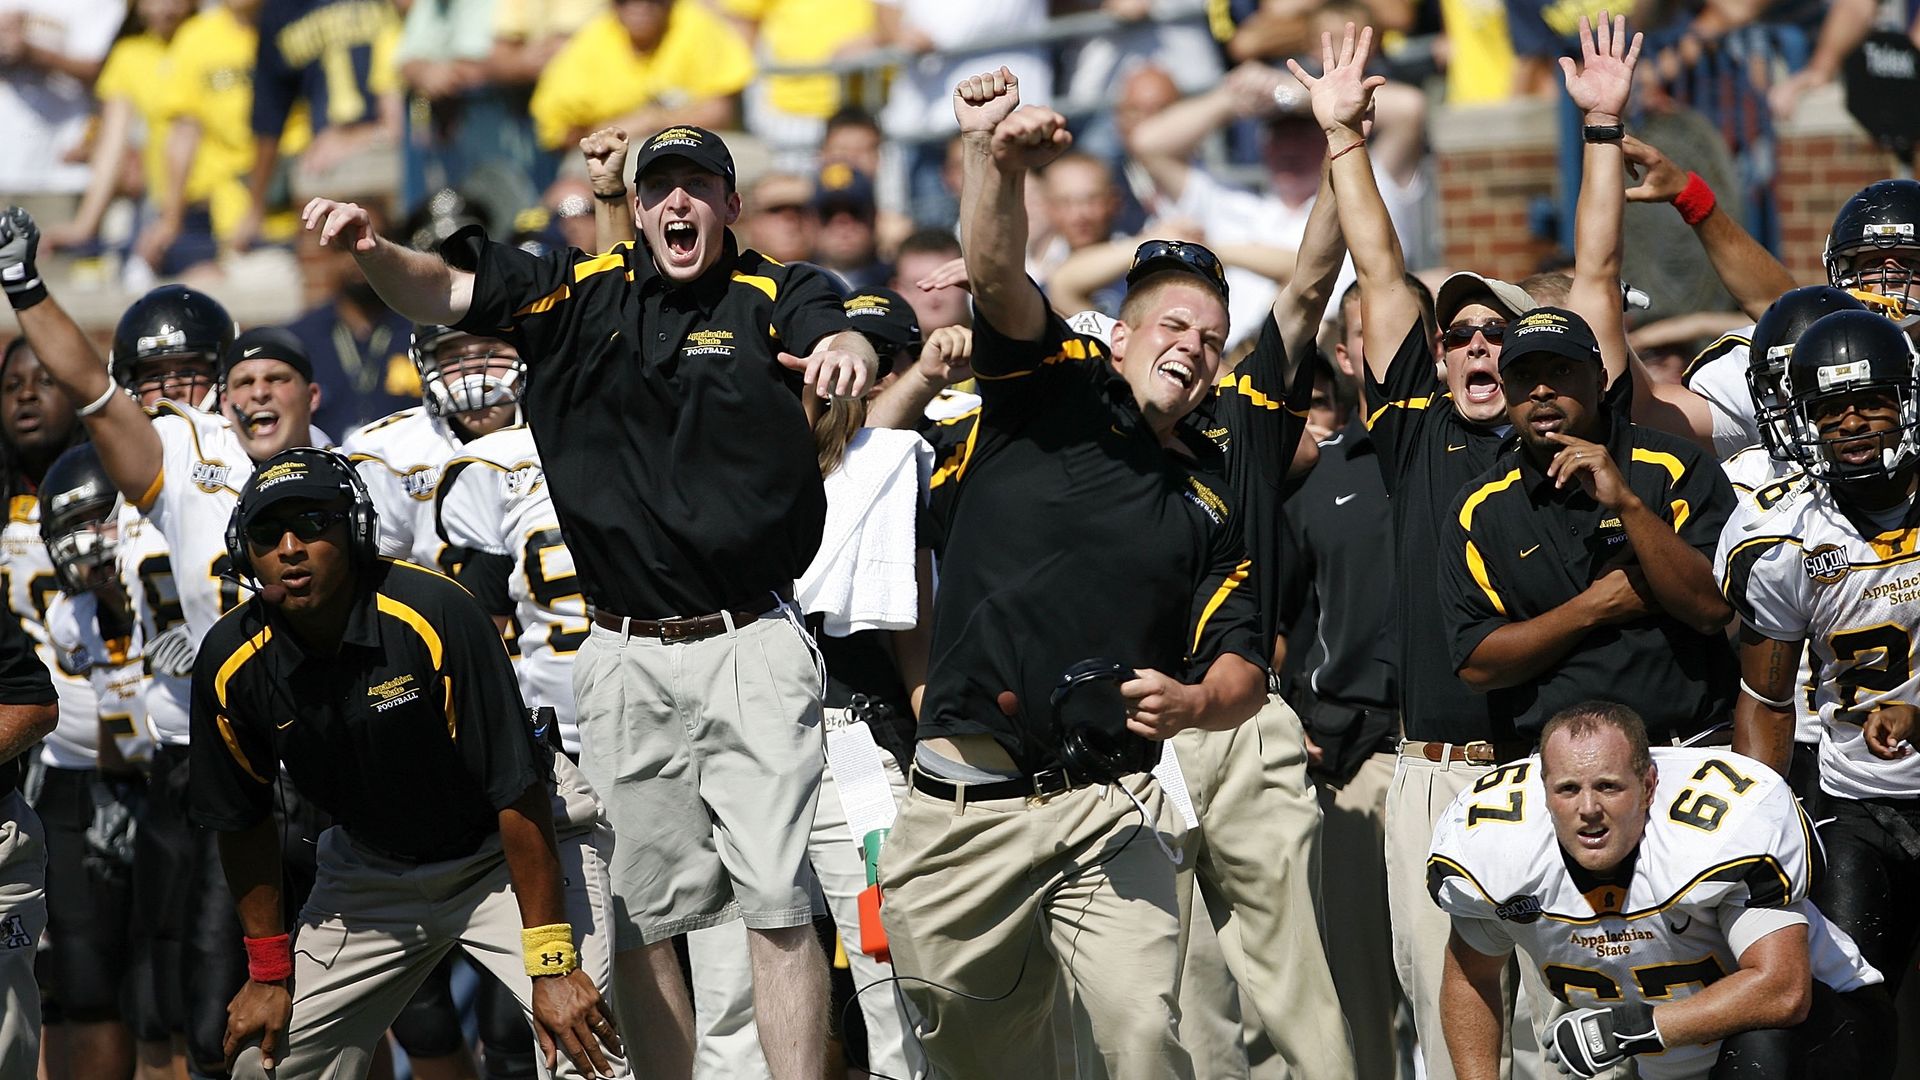 Appalachian State coaches cheer and celebrate on the sidelines